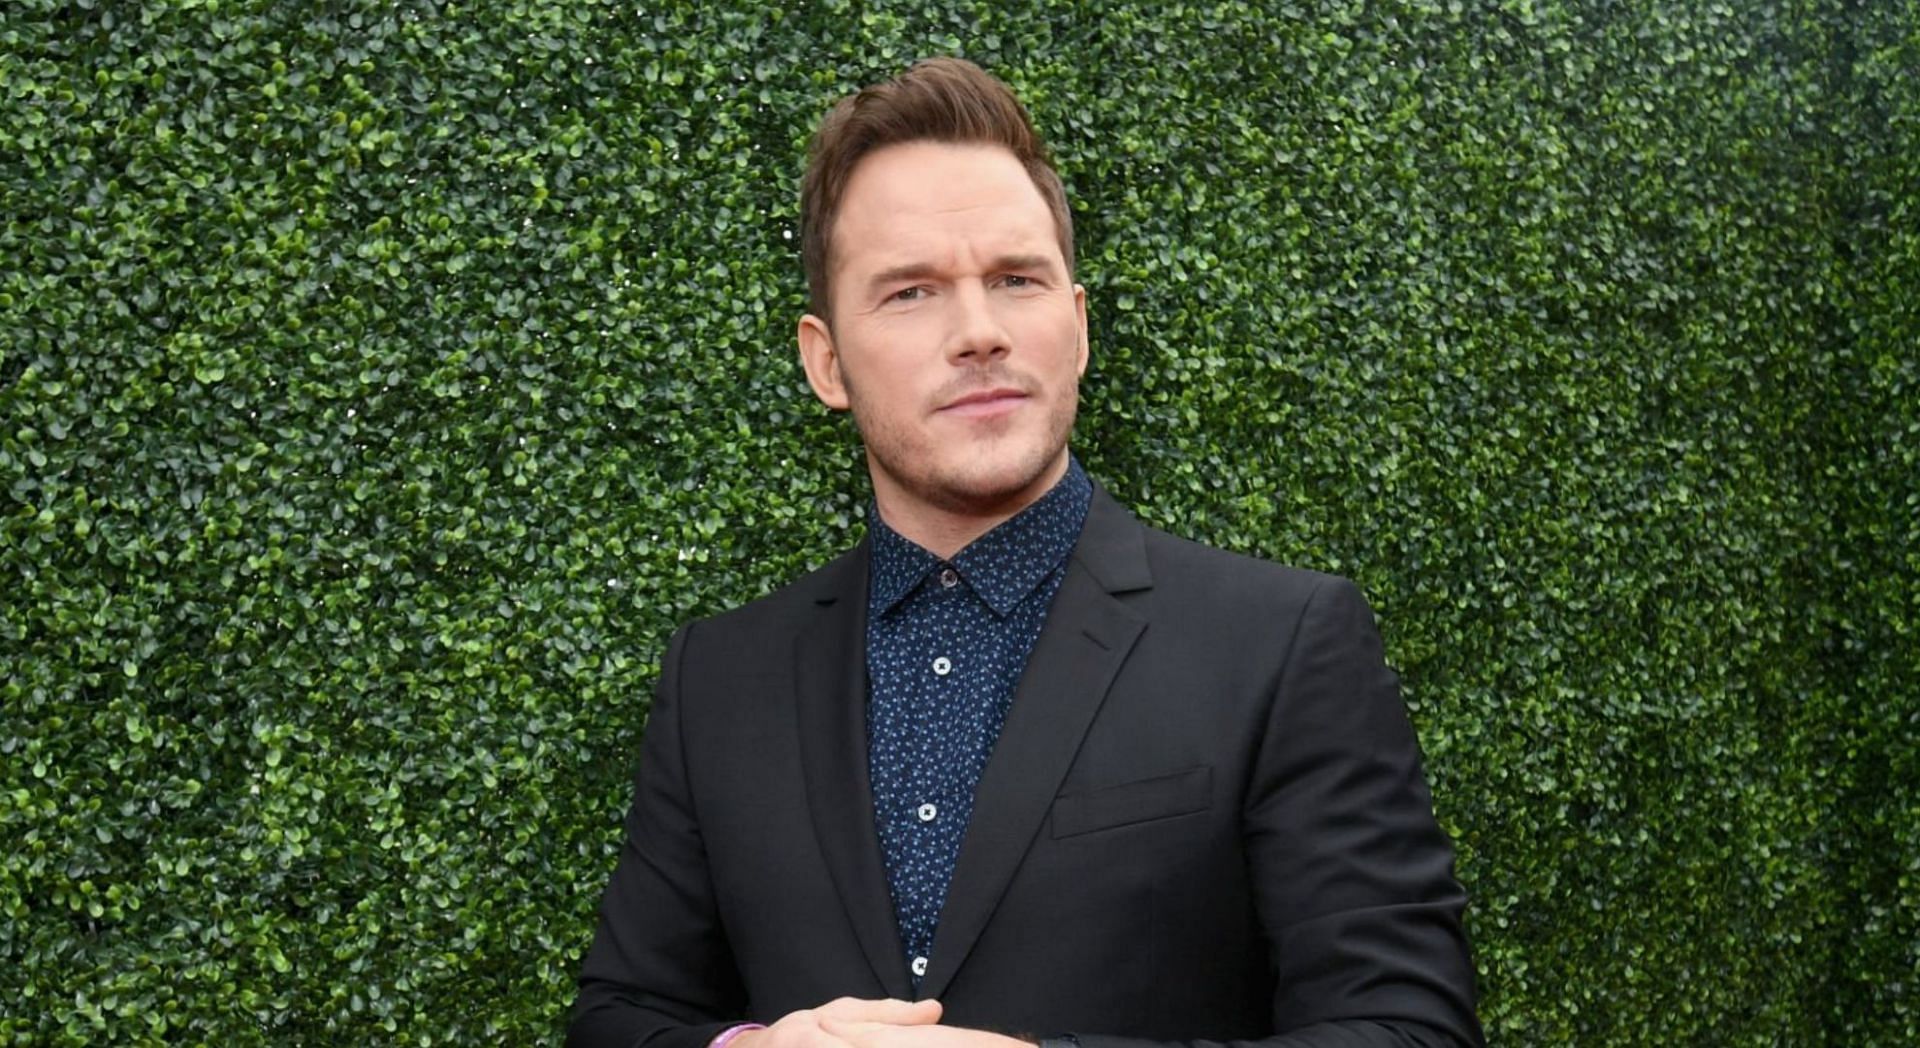 Chris Pratt shared that he recently suffered a bee sting in the eyelid after a failed beekeeping attempt (Image via Getty Images)